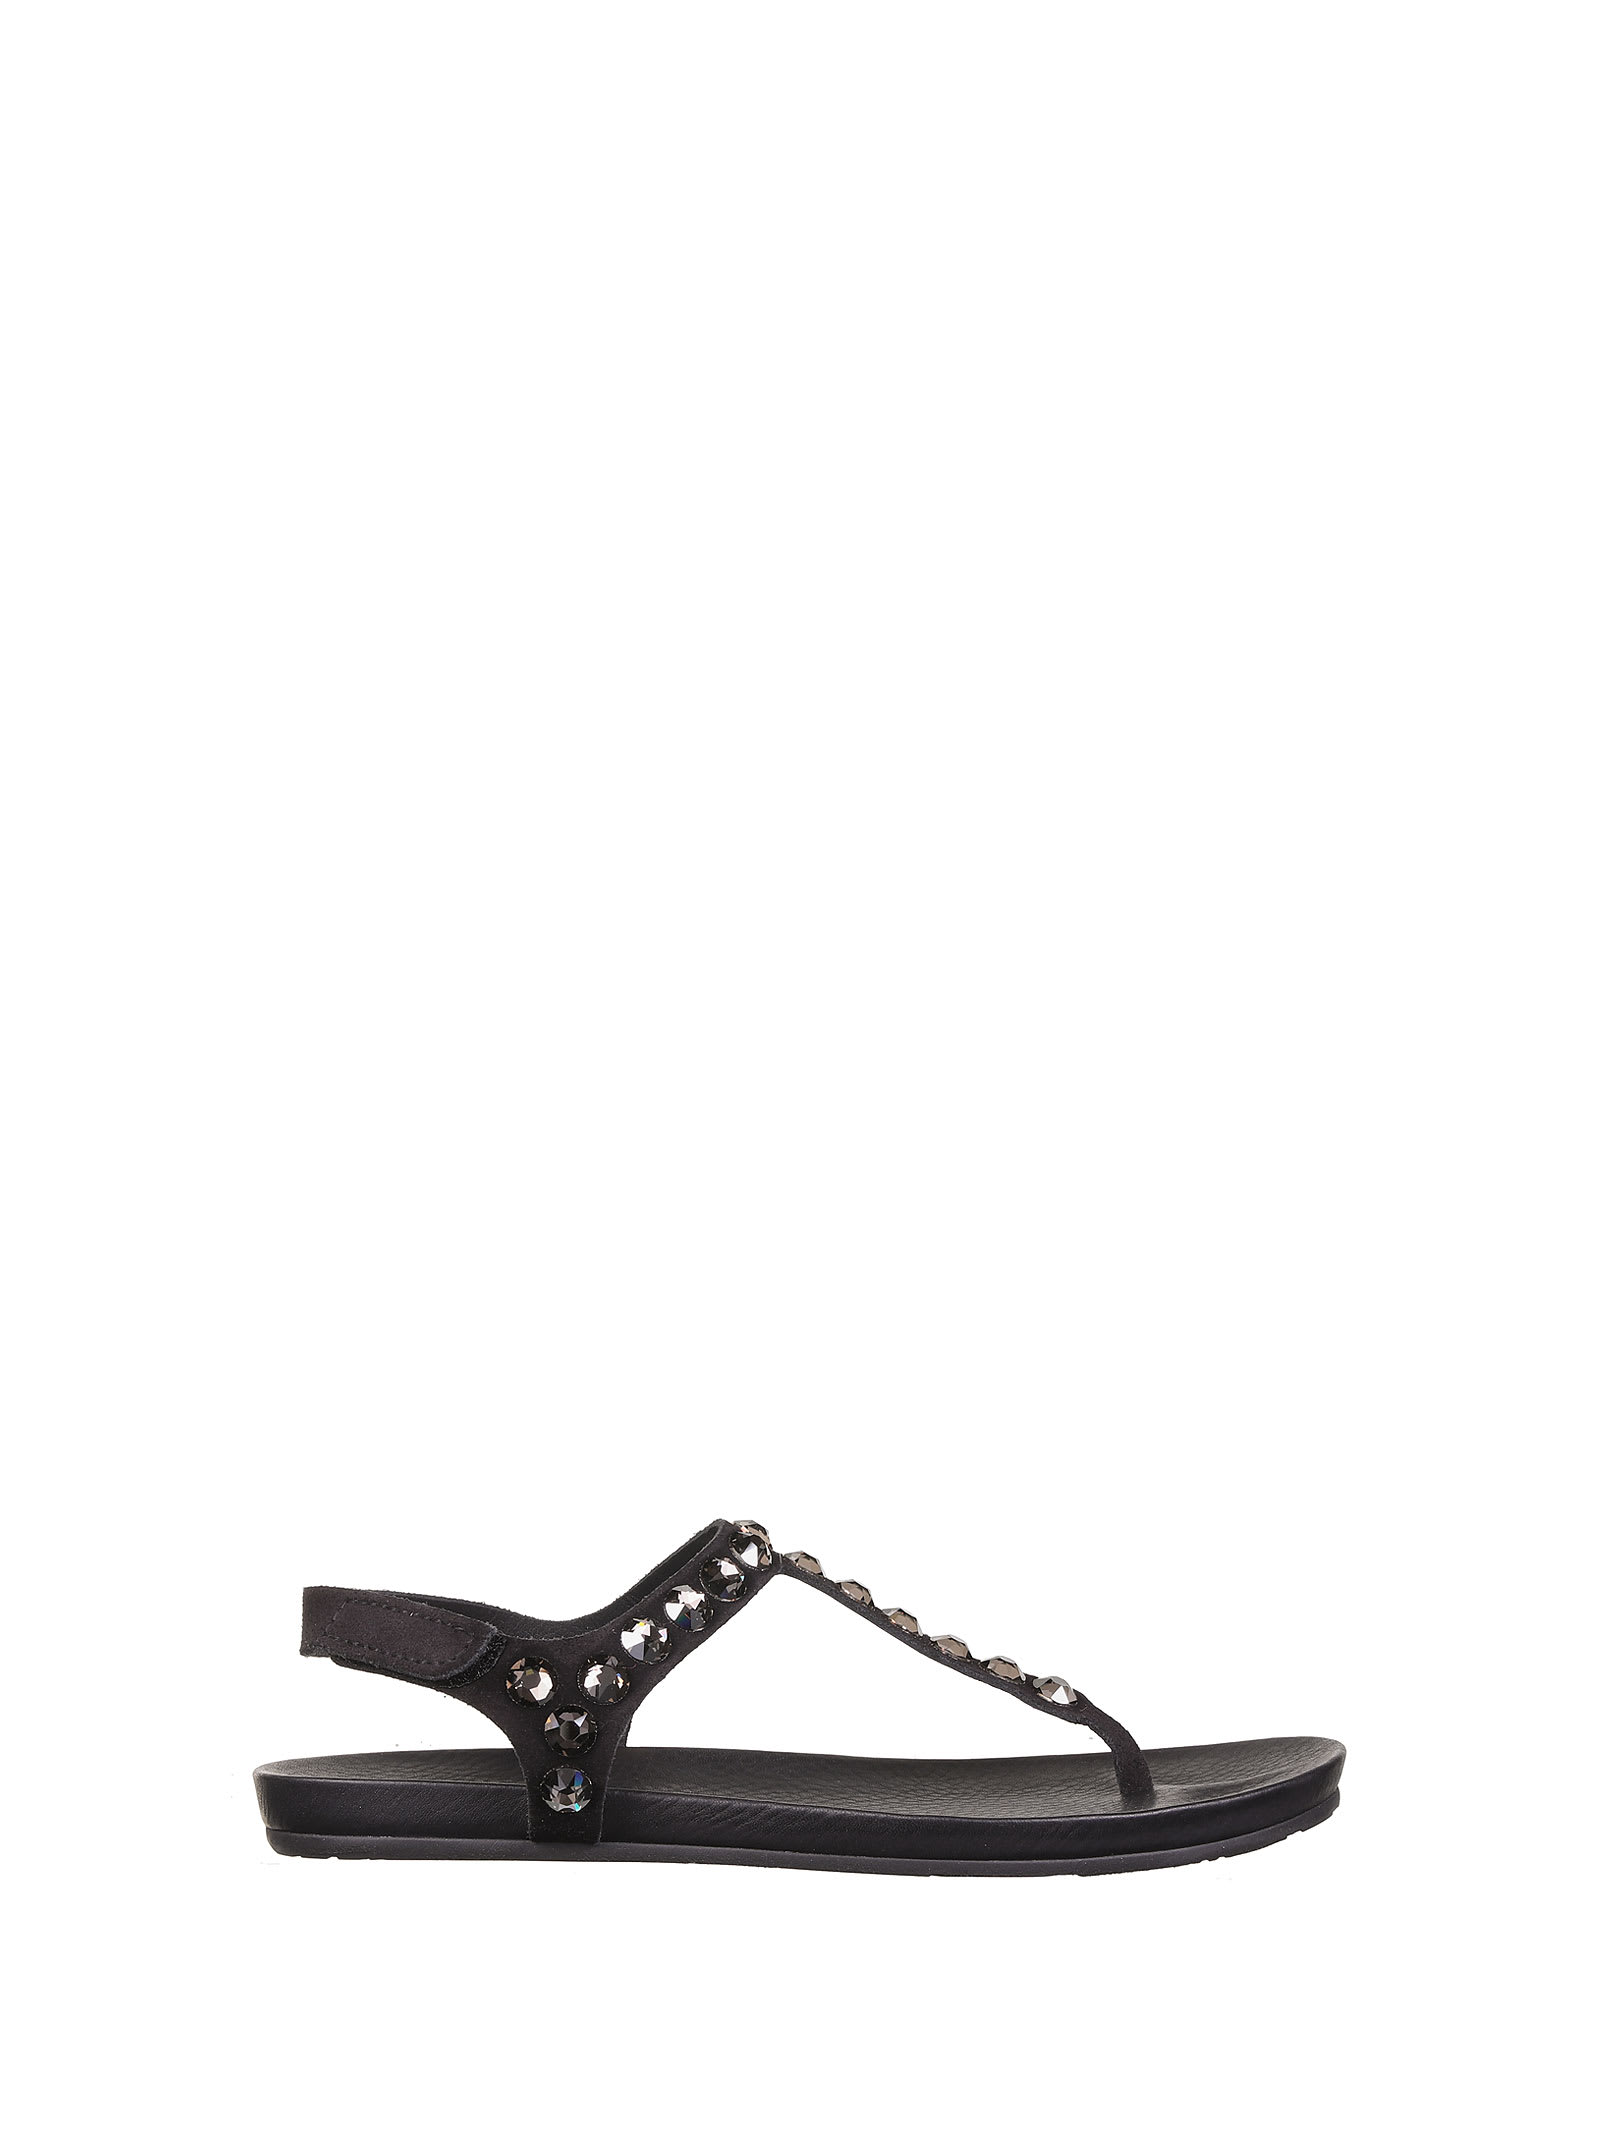 Pedro Garcia Thong Sandals With Rhinestones In Black Leather